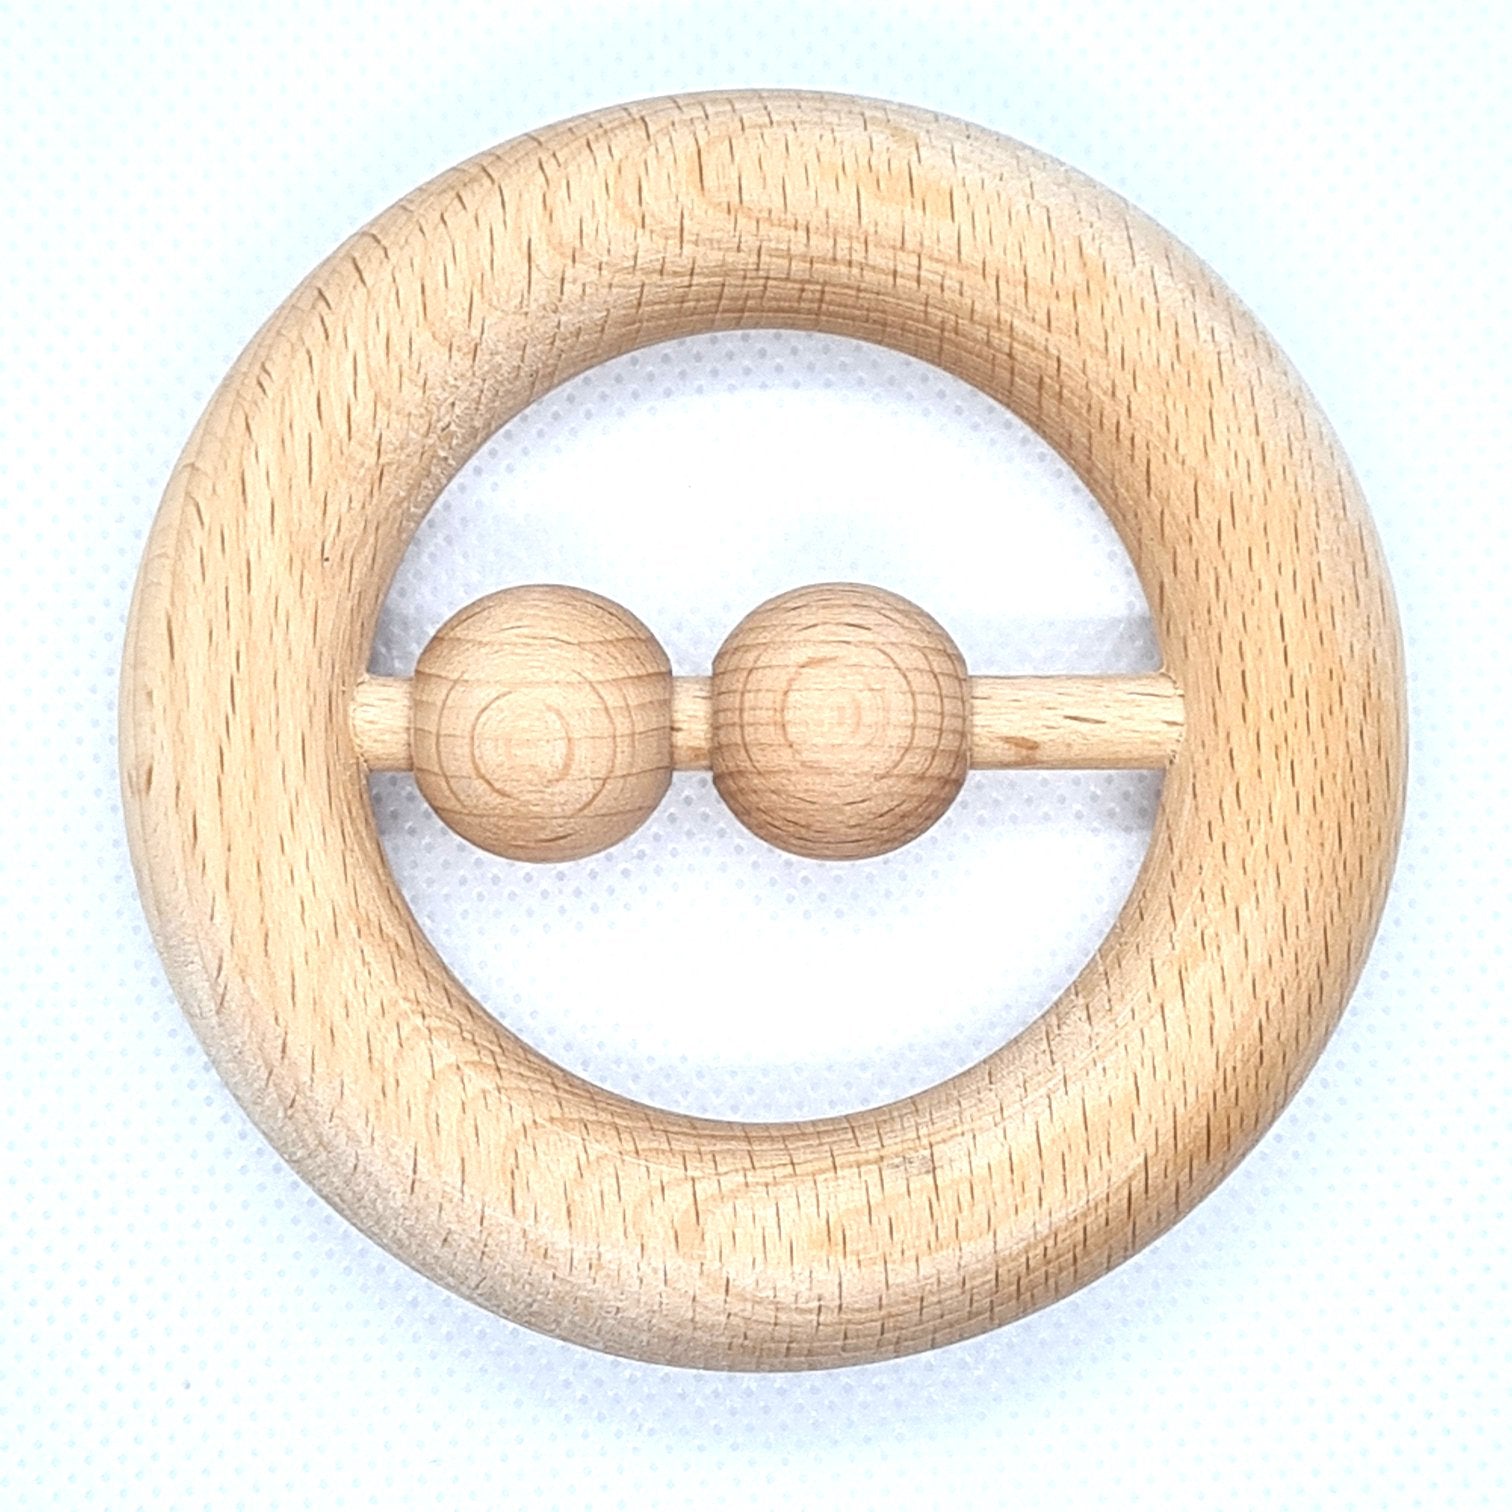 Wooden rattle with 2 beads